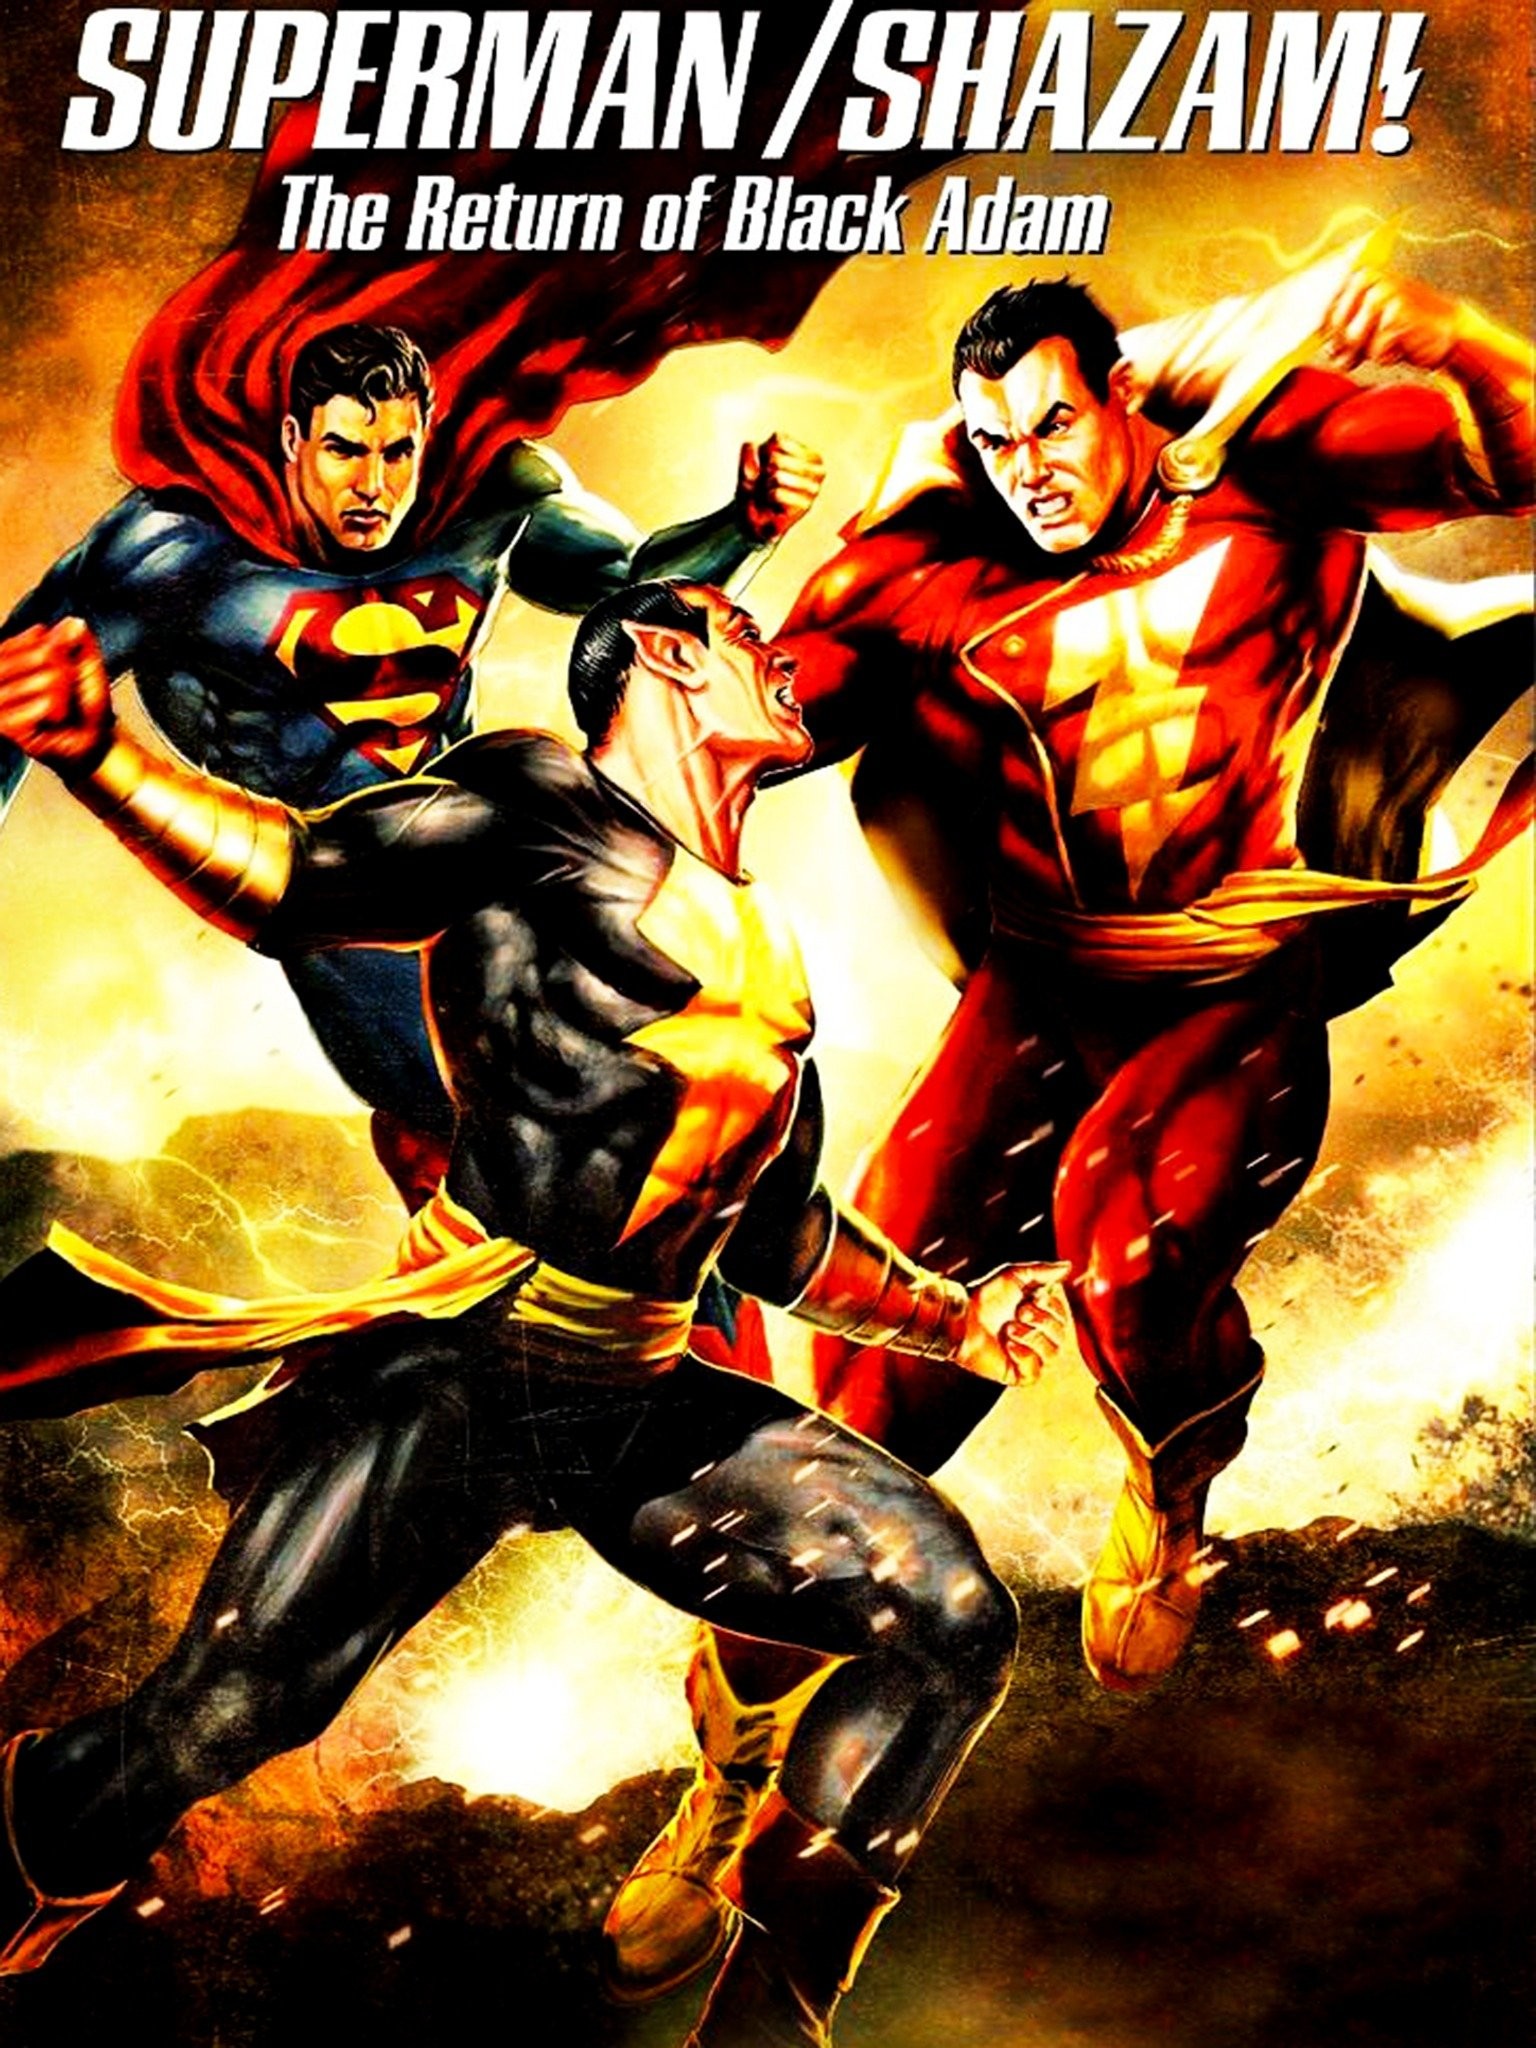 Rotten Tomatoes - First trailer for Black Adam featuring the